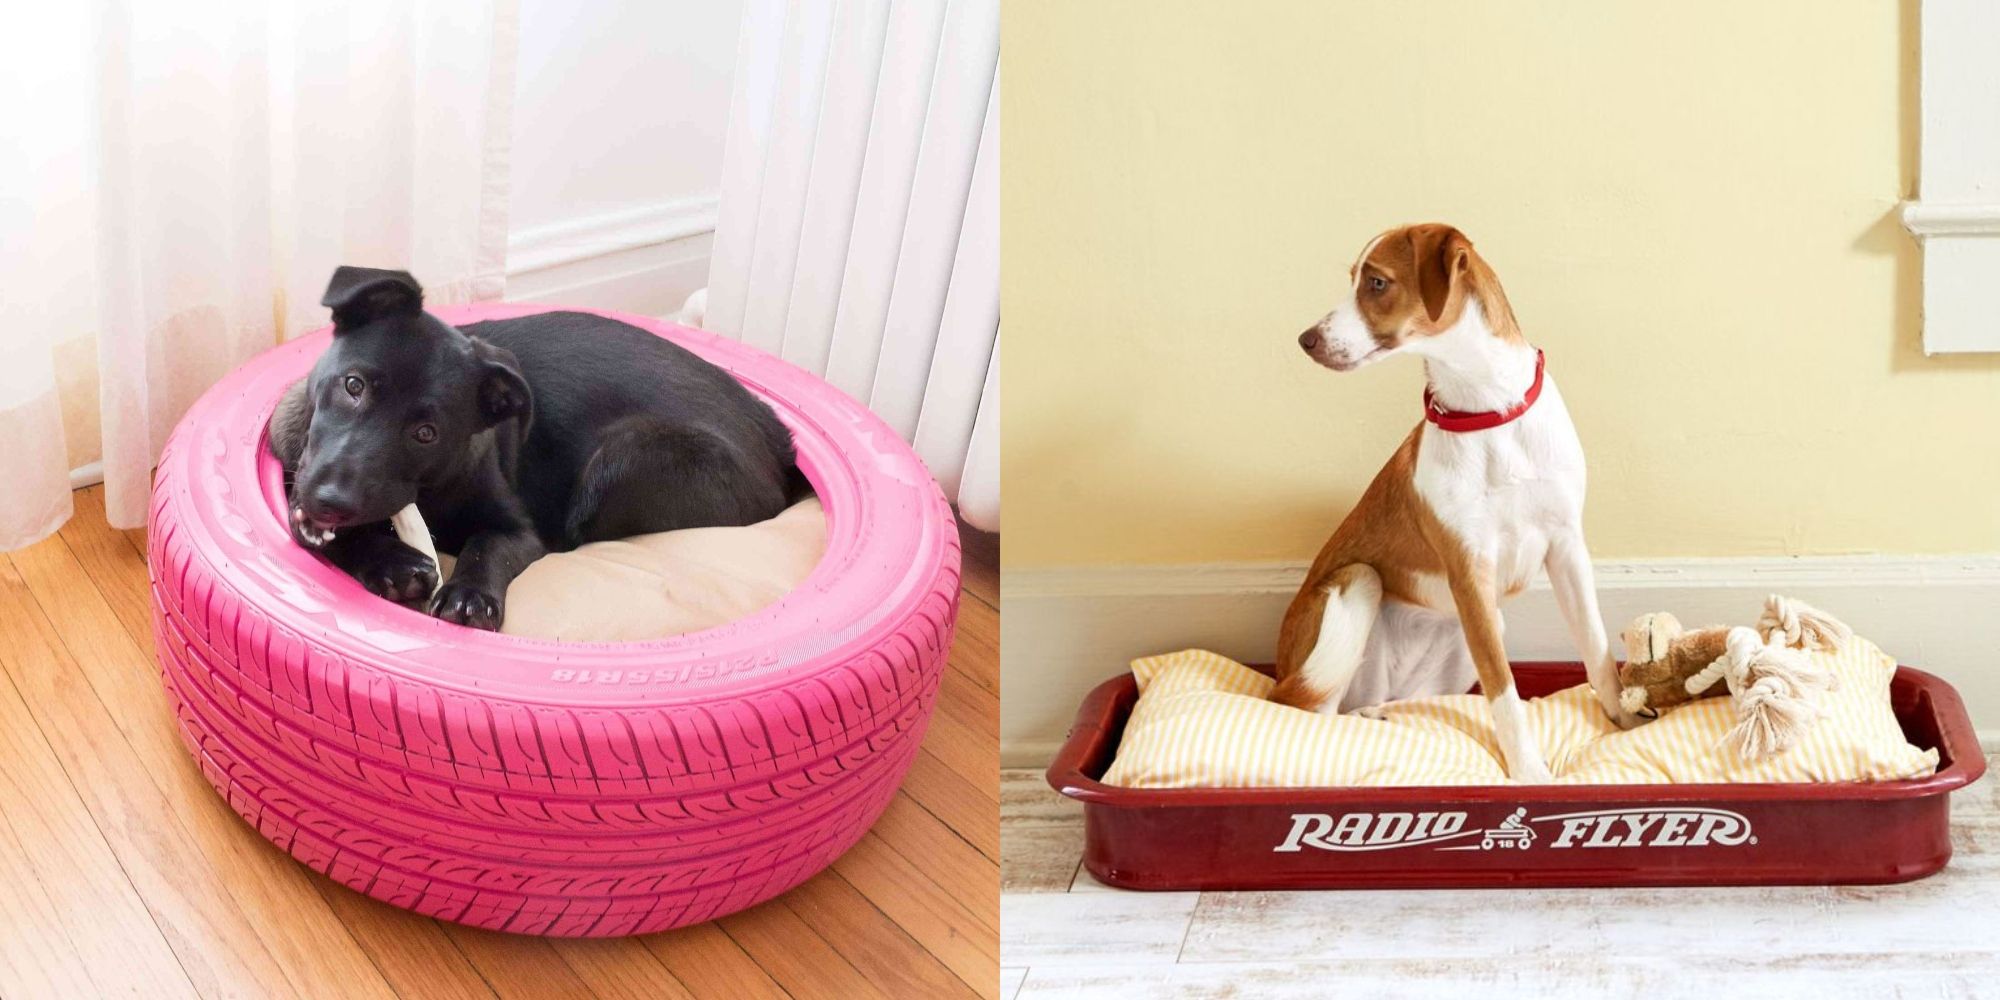 19 Adorable Diy Dog Beds How To Make, King Bed With Dog Insert